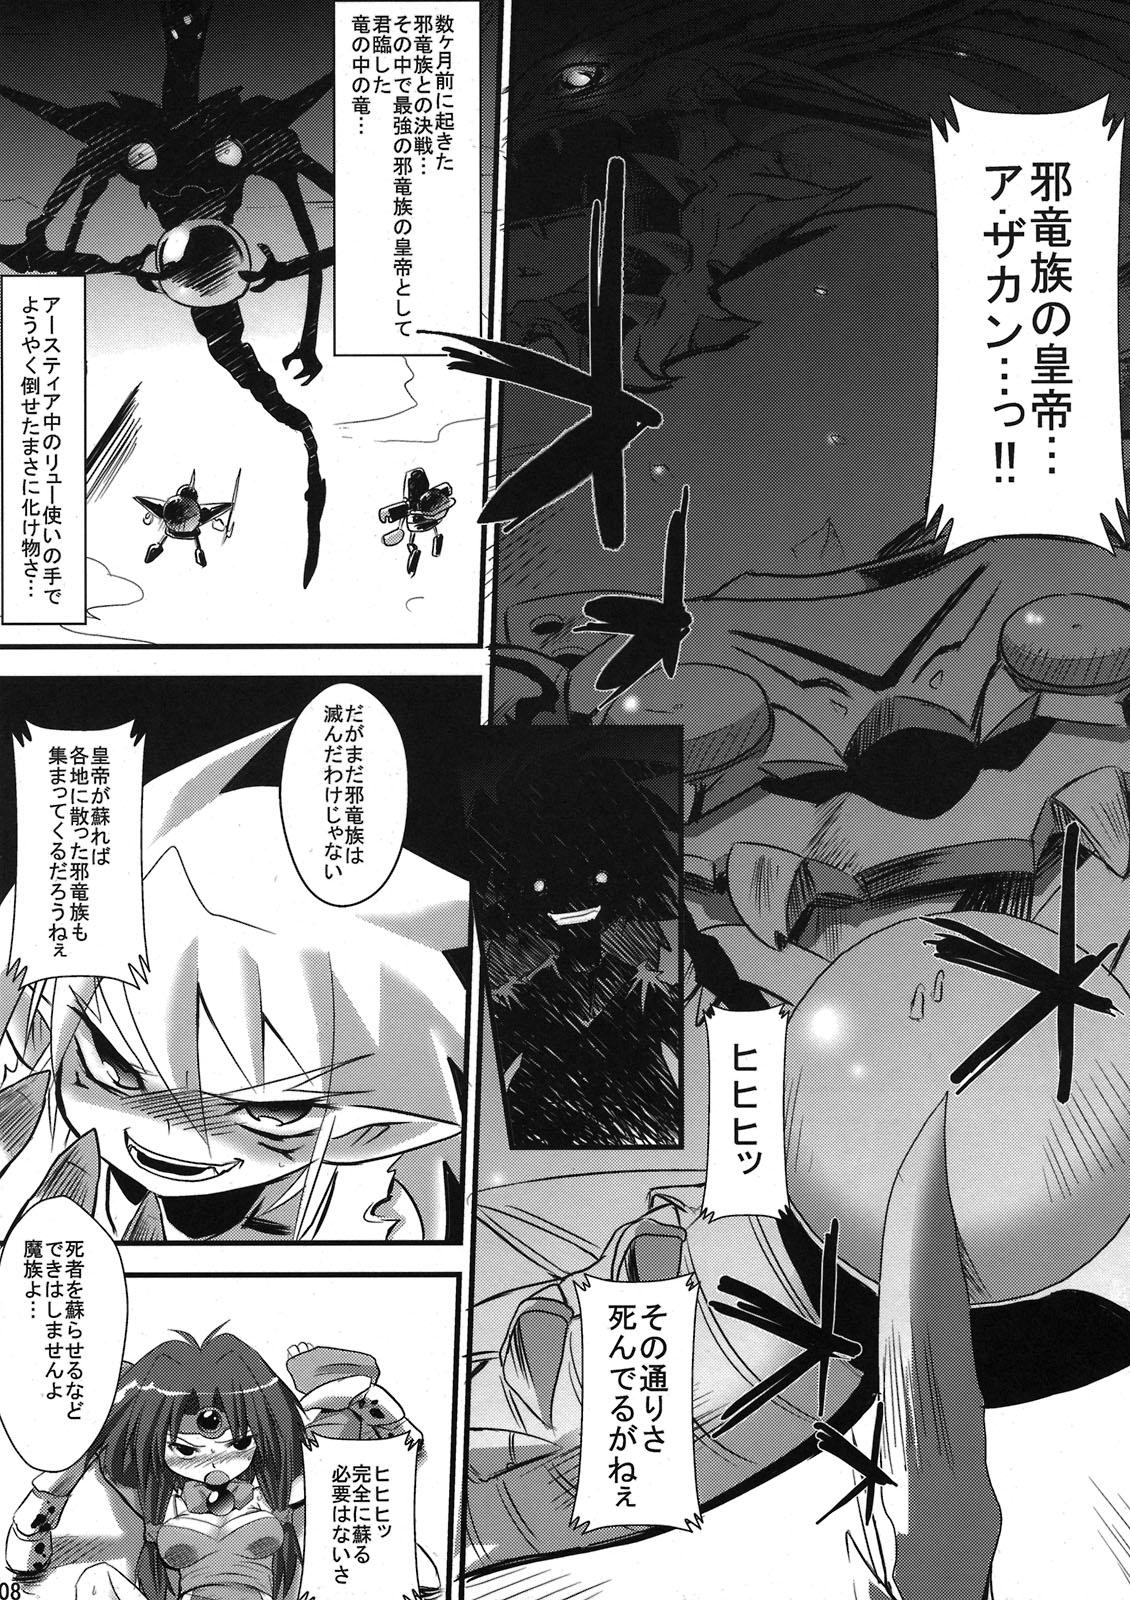 White Chick Toraware no Madouhime Joukan - Lord of lords ryu knight Maid - Page 8